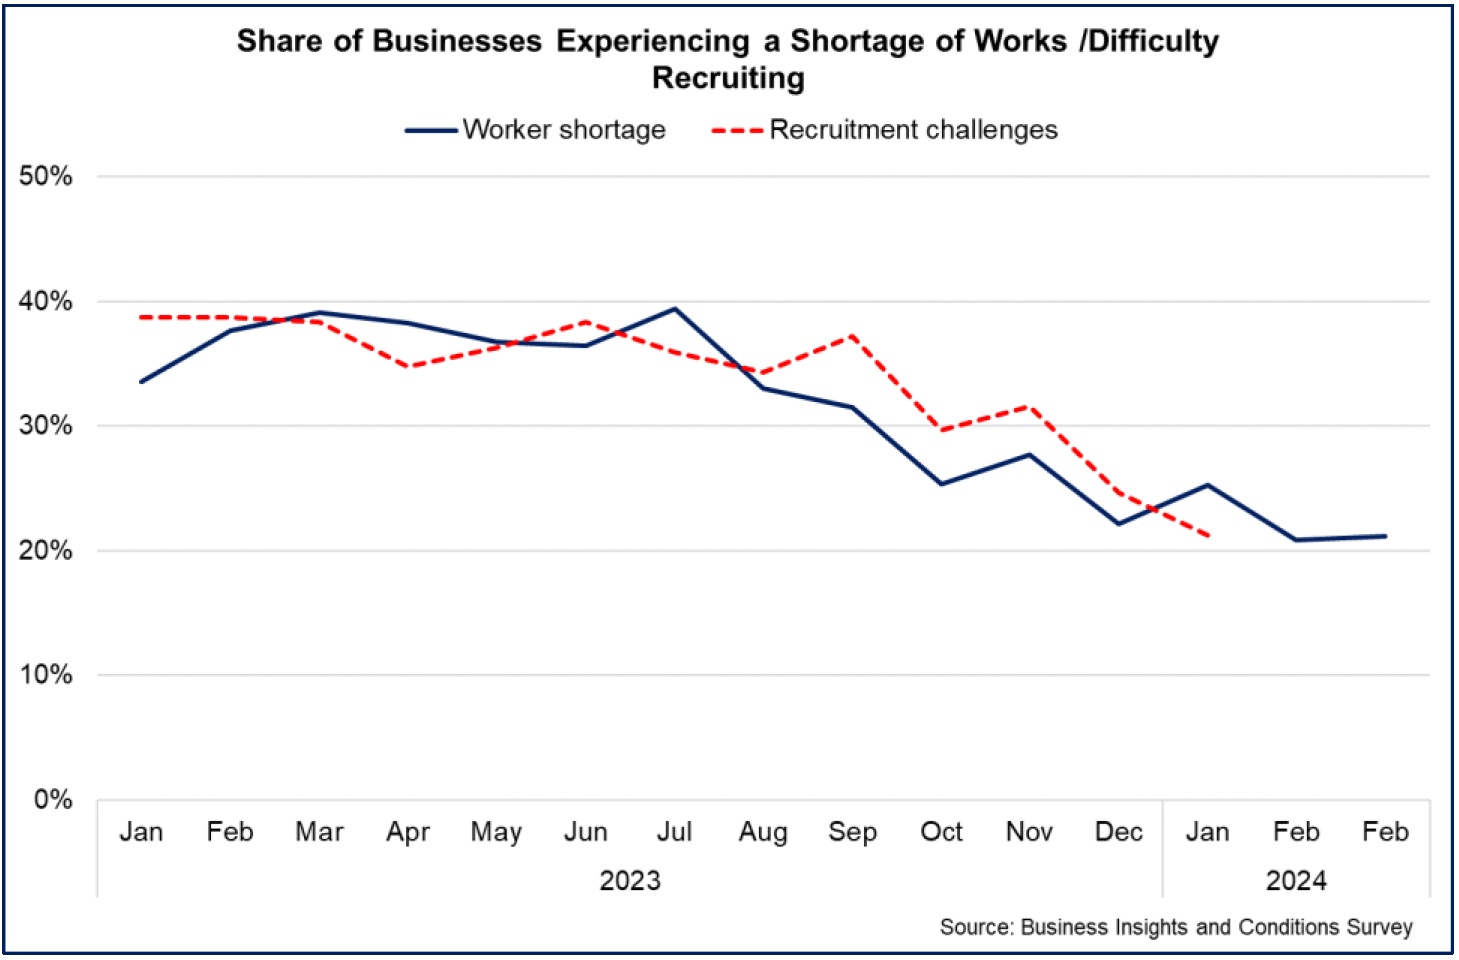 share of businesses reporting recruitment difficulties and worker shortages has fallen over 2023 and into the start of 2024